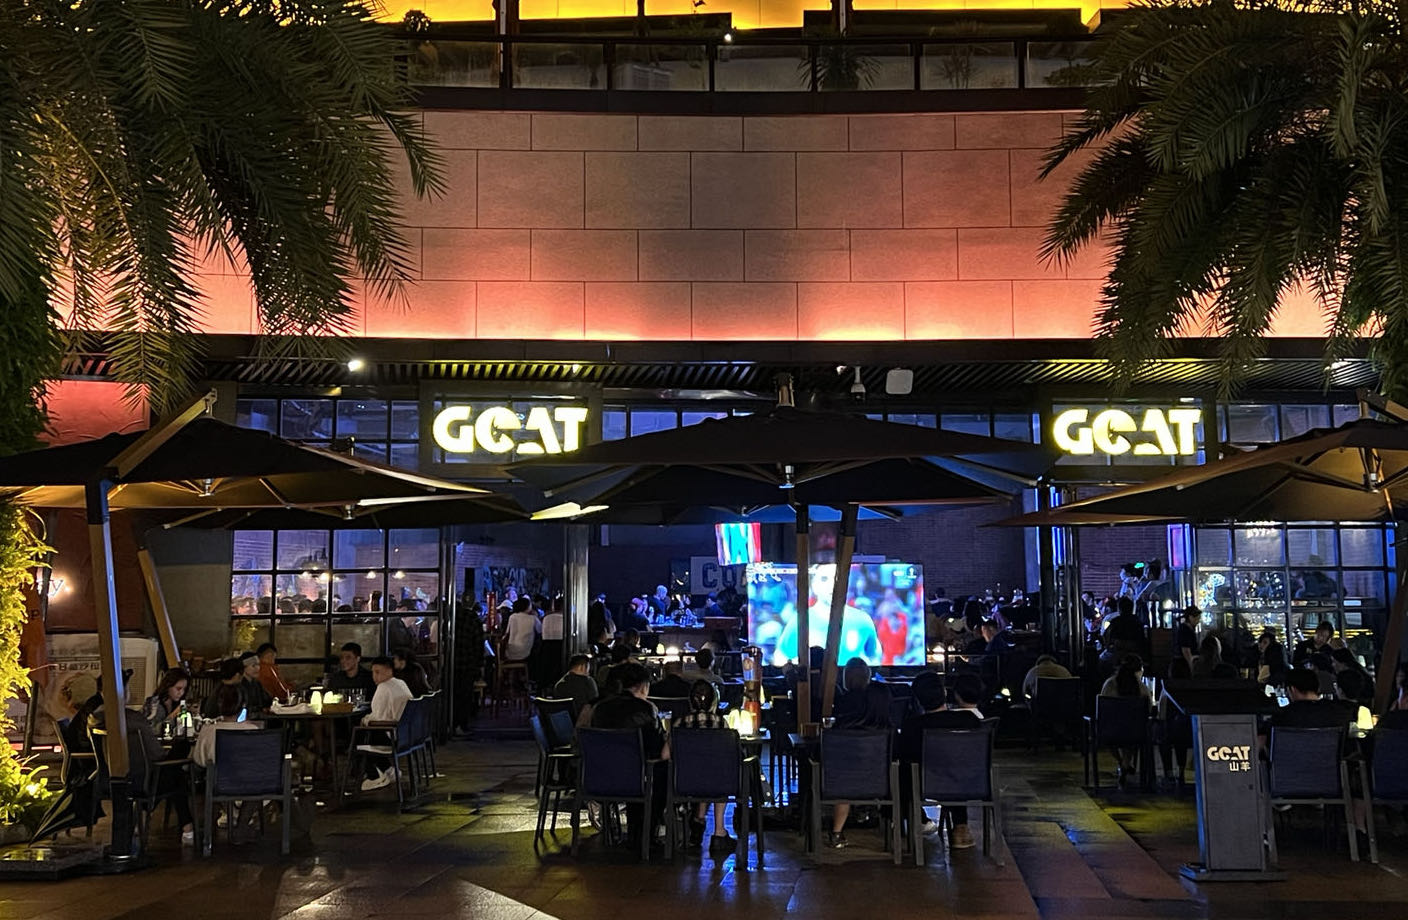 The GOAT Celebrates Belated Grand Opening After Three Exciting Years